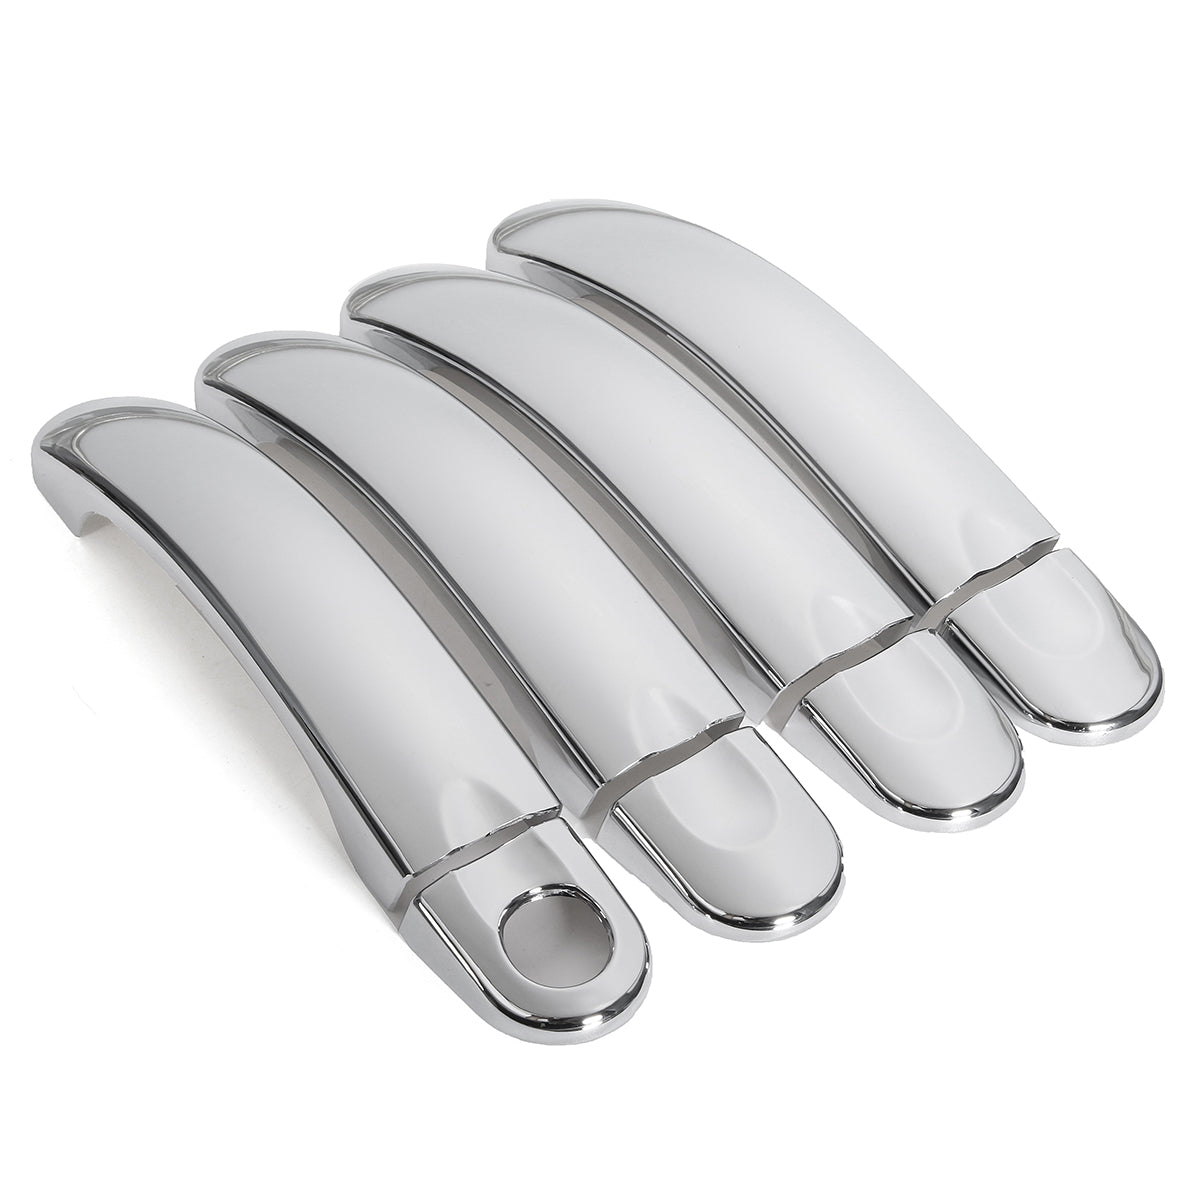 Gray 8pcs Chromed Stainless Steel Door Handle Cover Trim Set For VW Transporter T5 Caddy